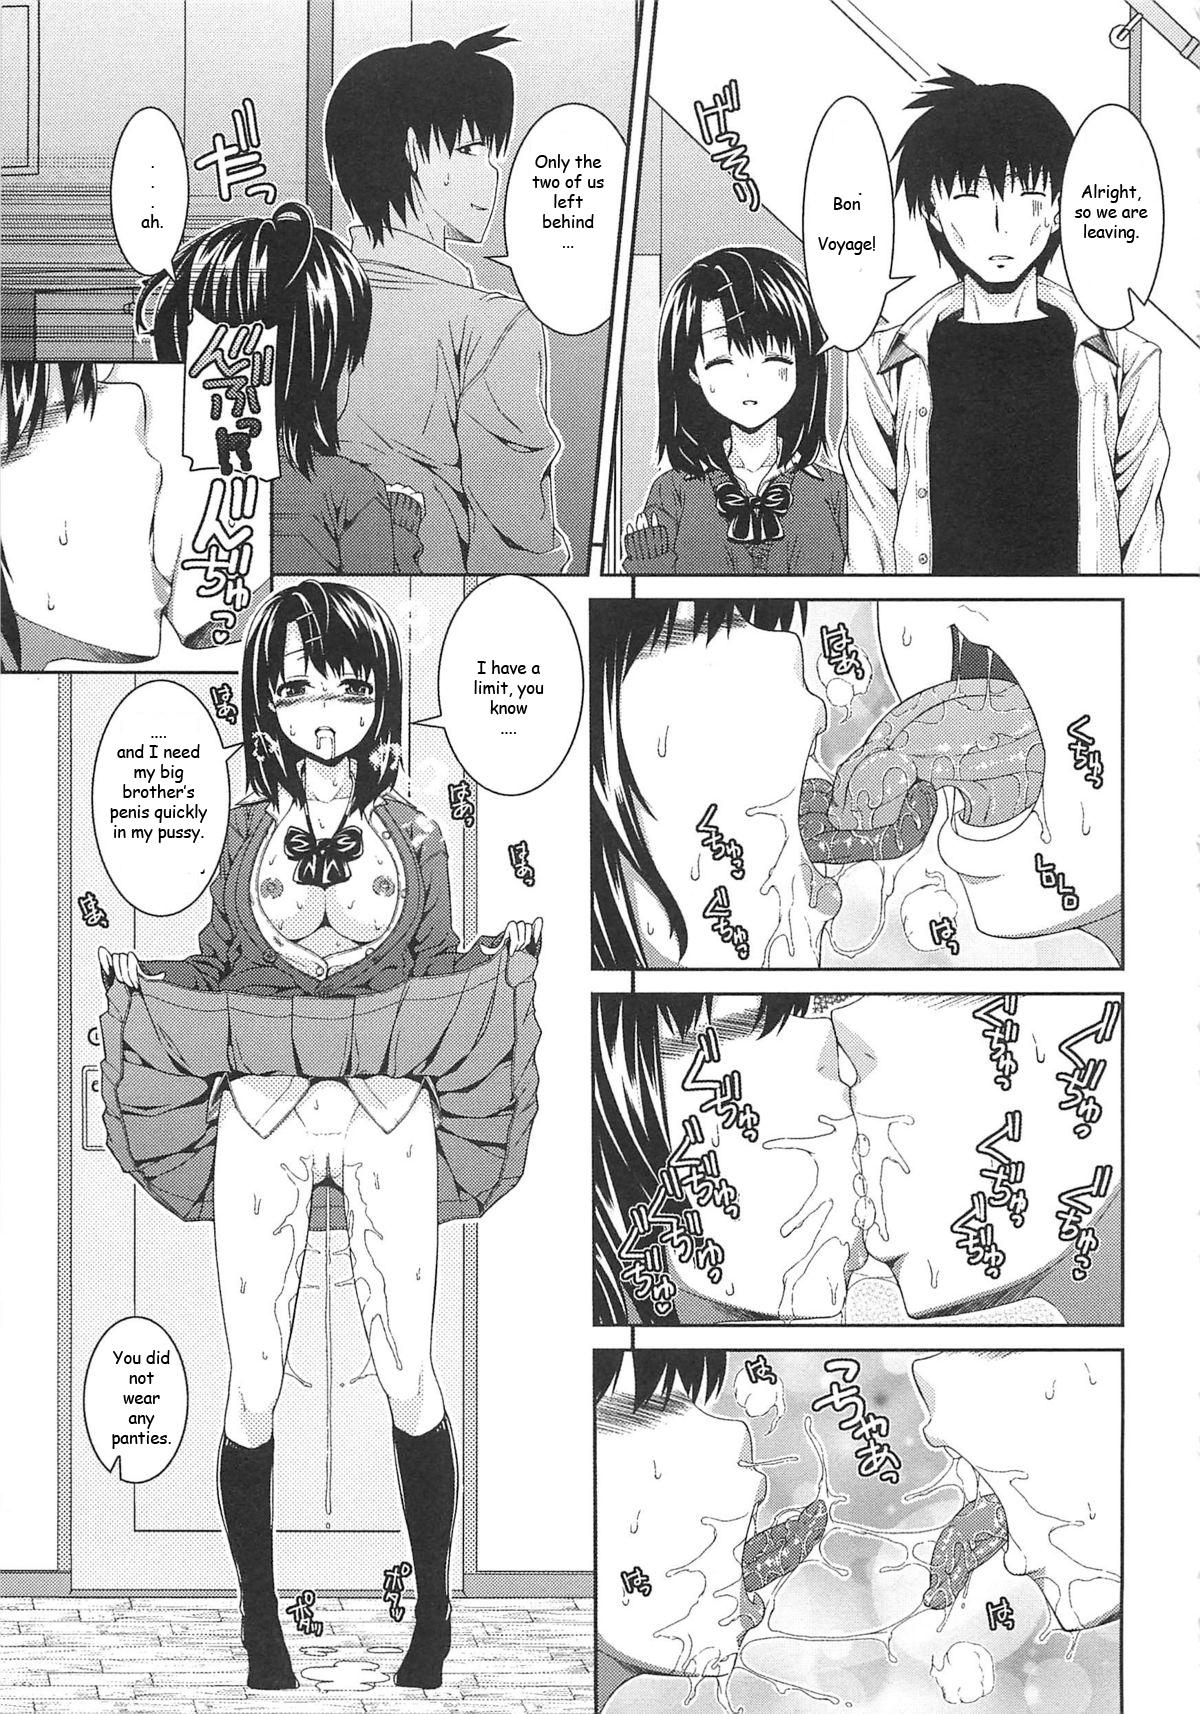 Hermana Imouto Seven Days Footworship - Page 5